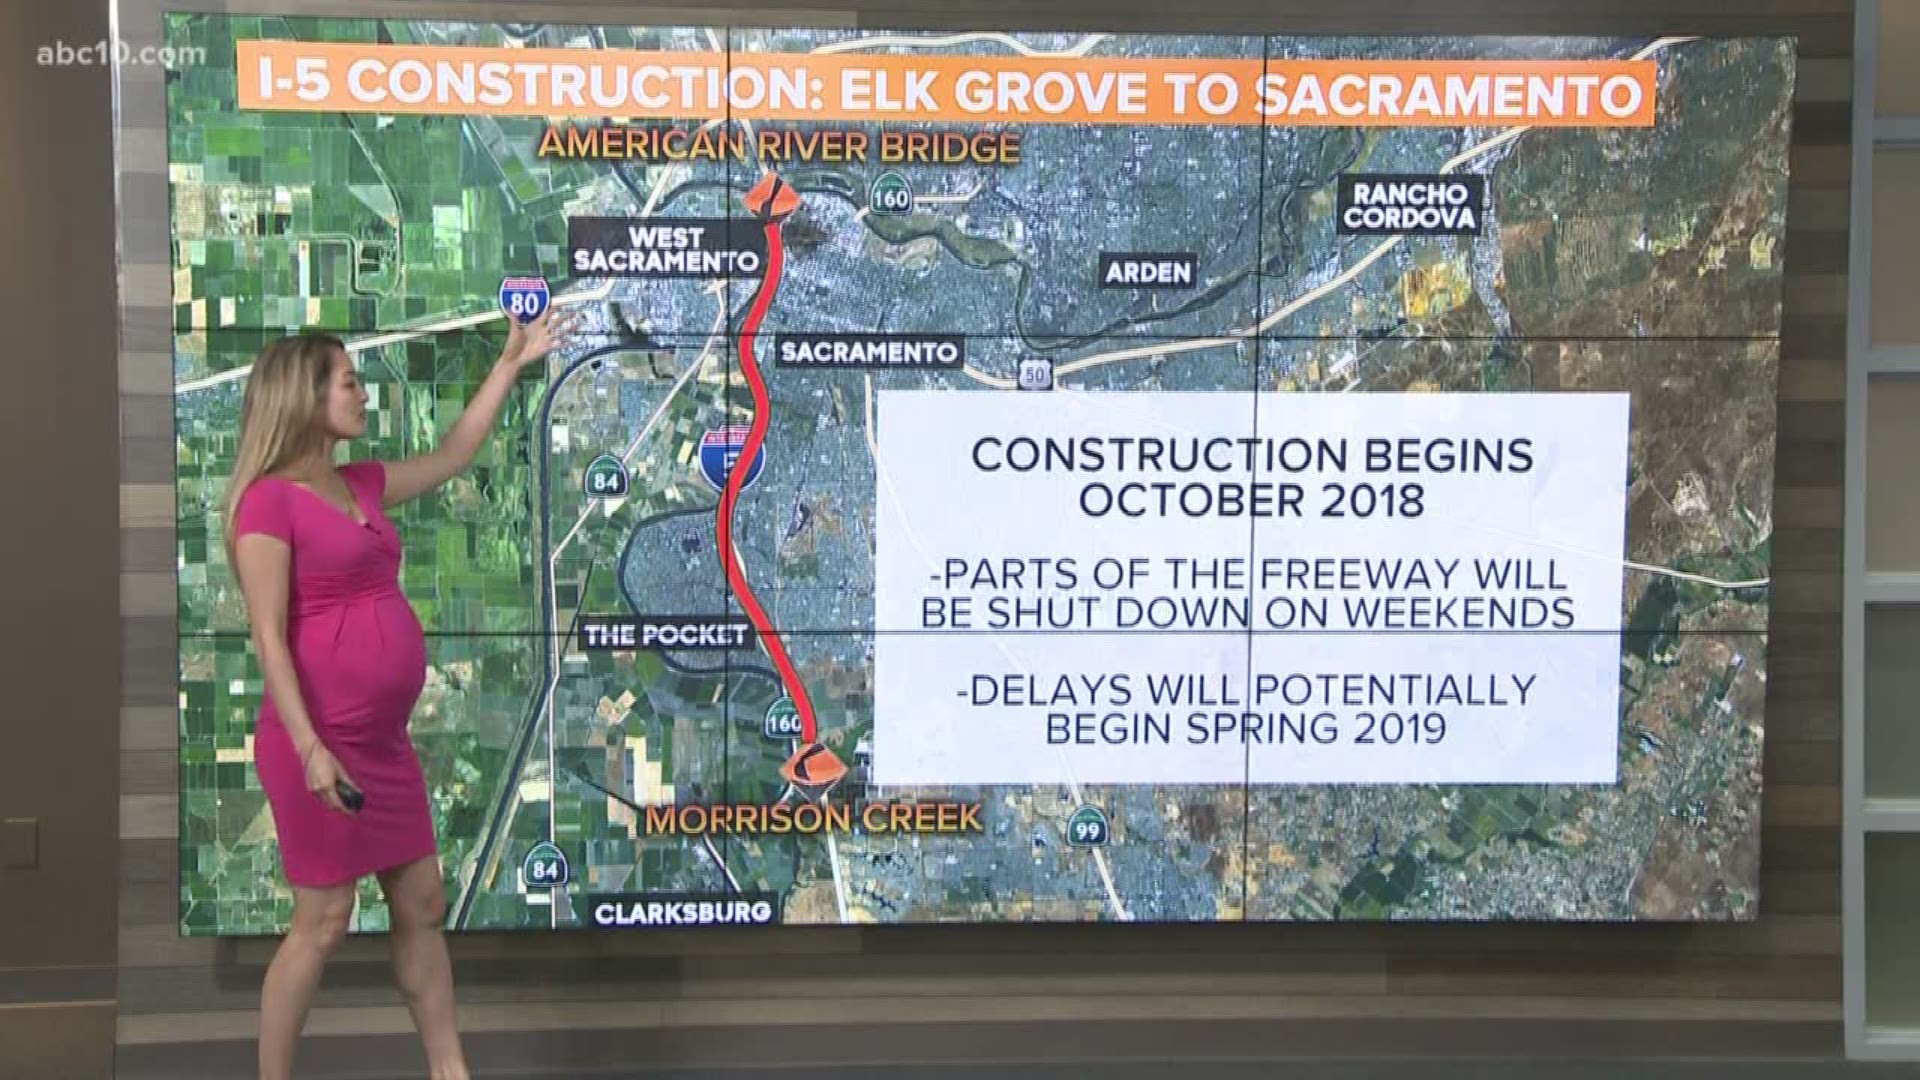 Here's something you're not going to like reading: There's going to soon be a lot of traffic on I-5 pretty soon.